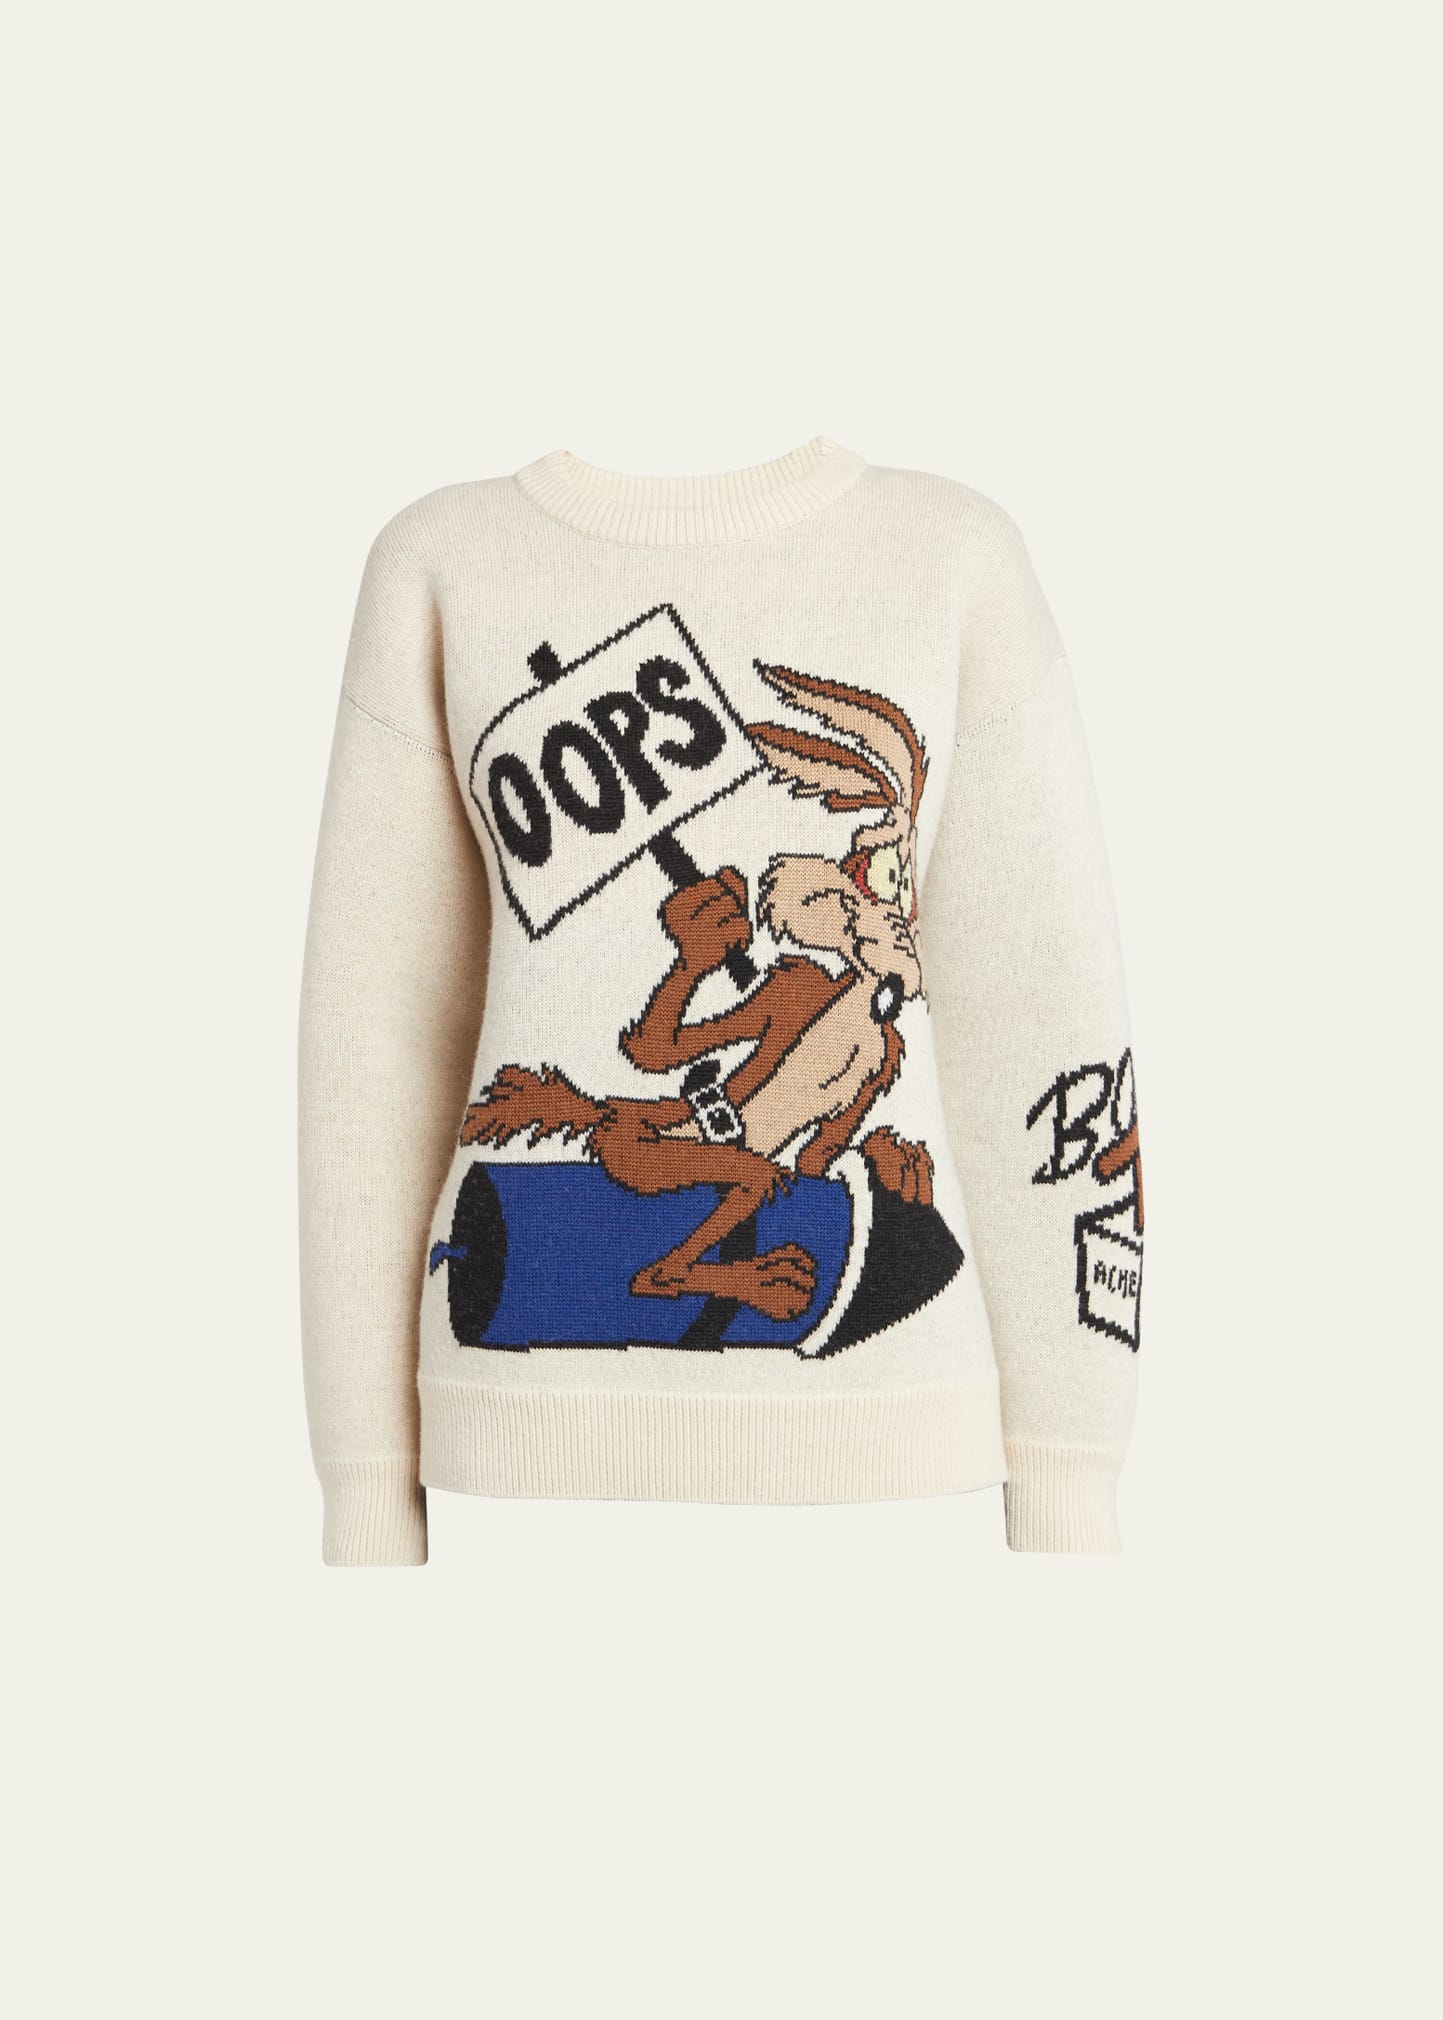 Wile E. Coyote and the Road Runner Wool Jacquard Sweater